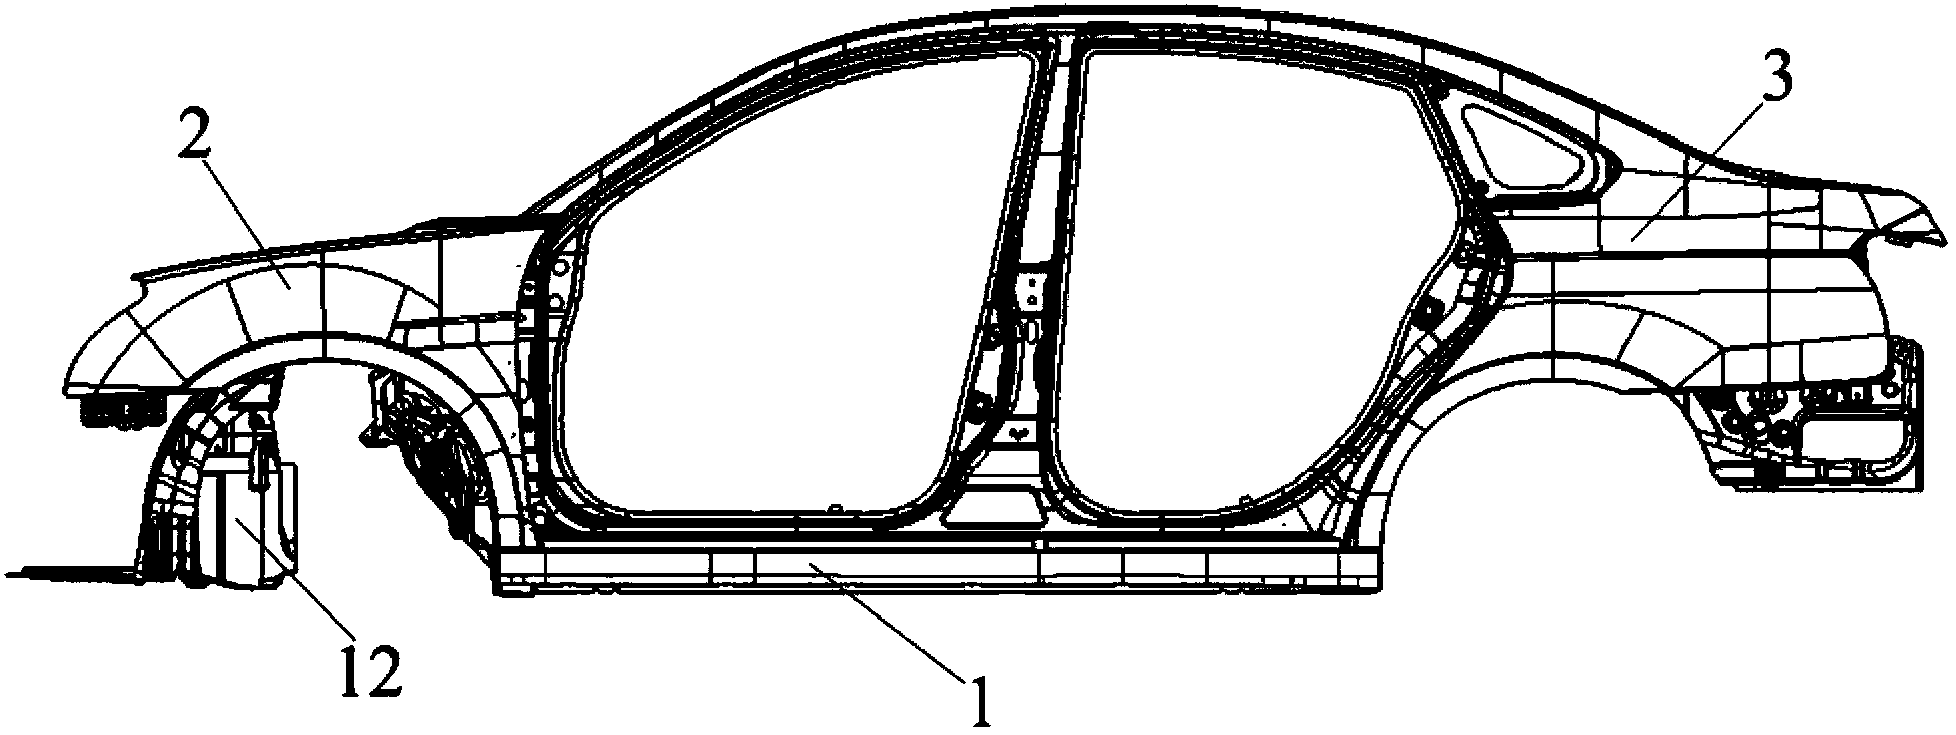 Mounting structure of threshold decoration part